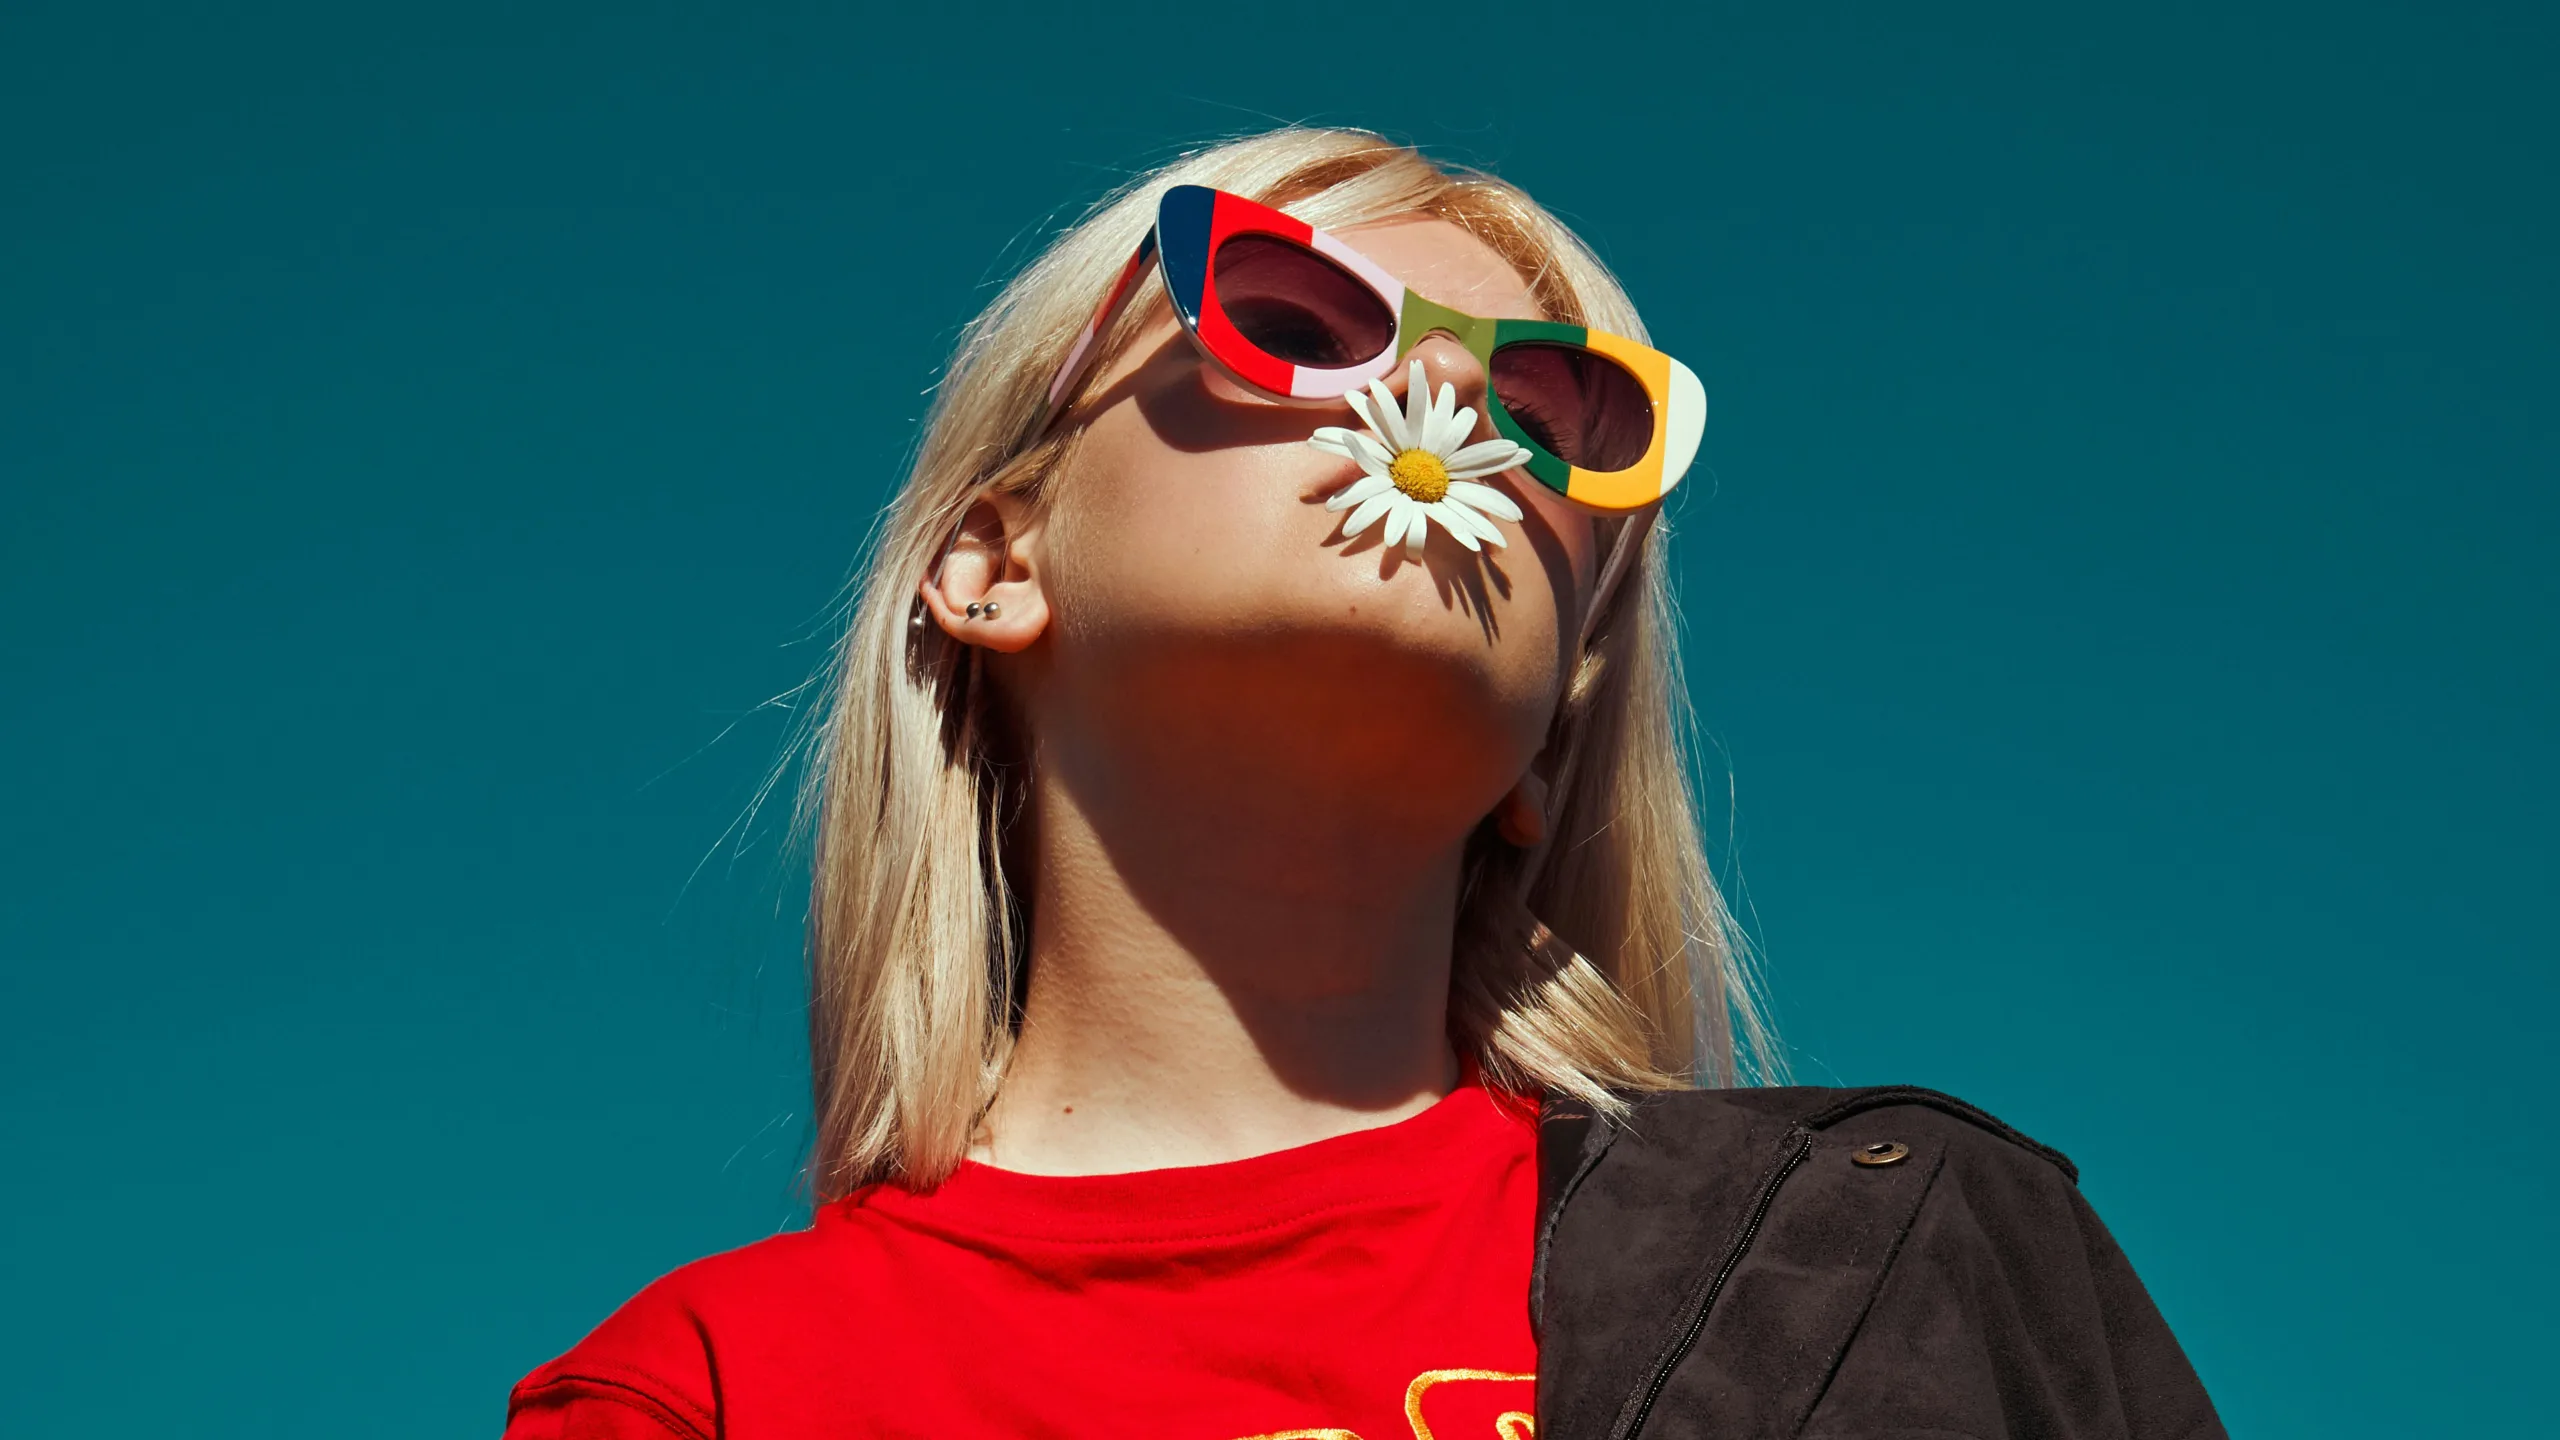 A photograph of a woman wearing sunglasses with a flower in her mouth